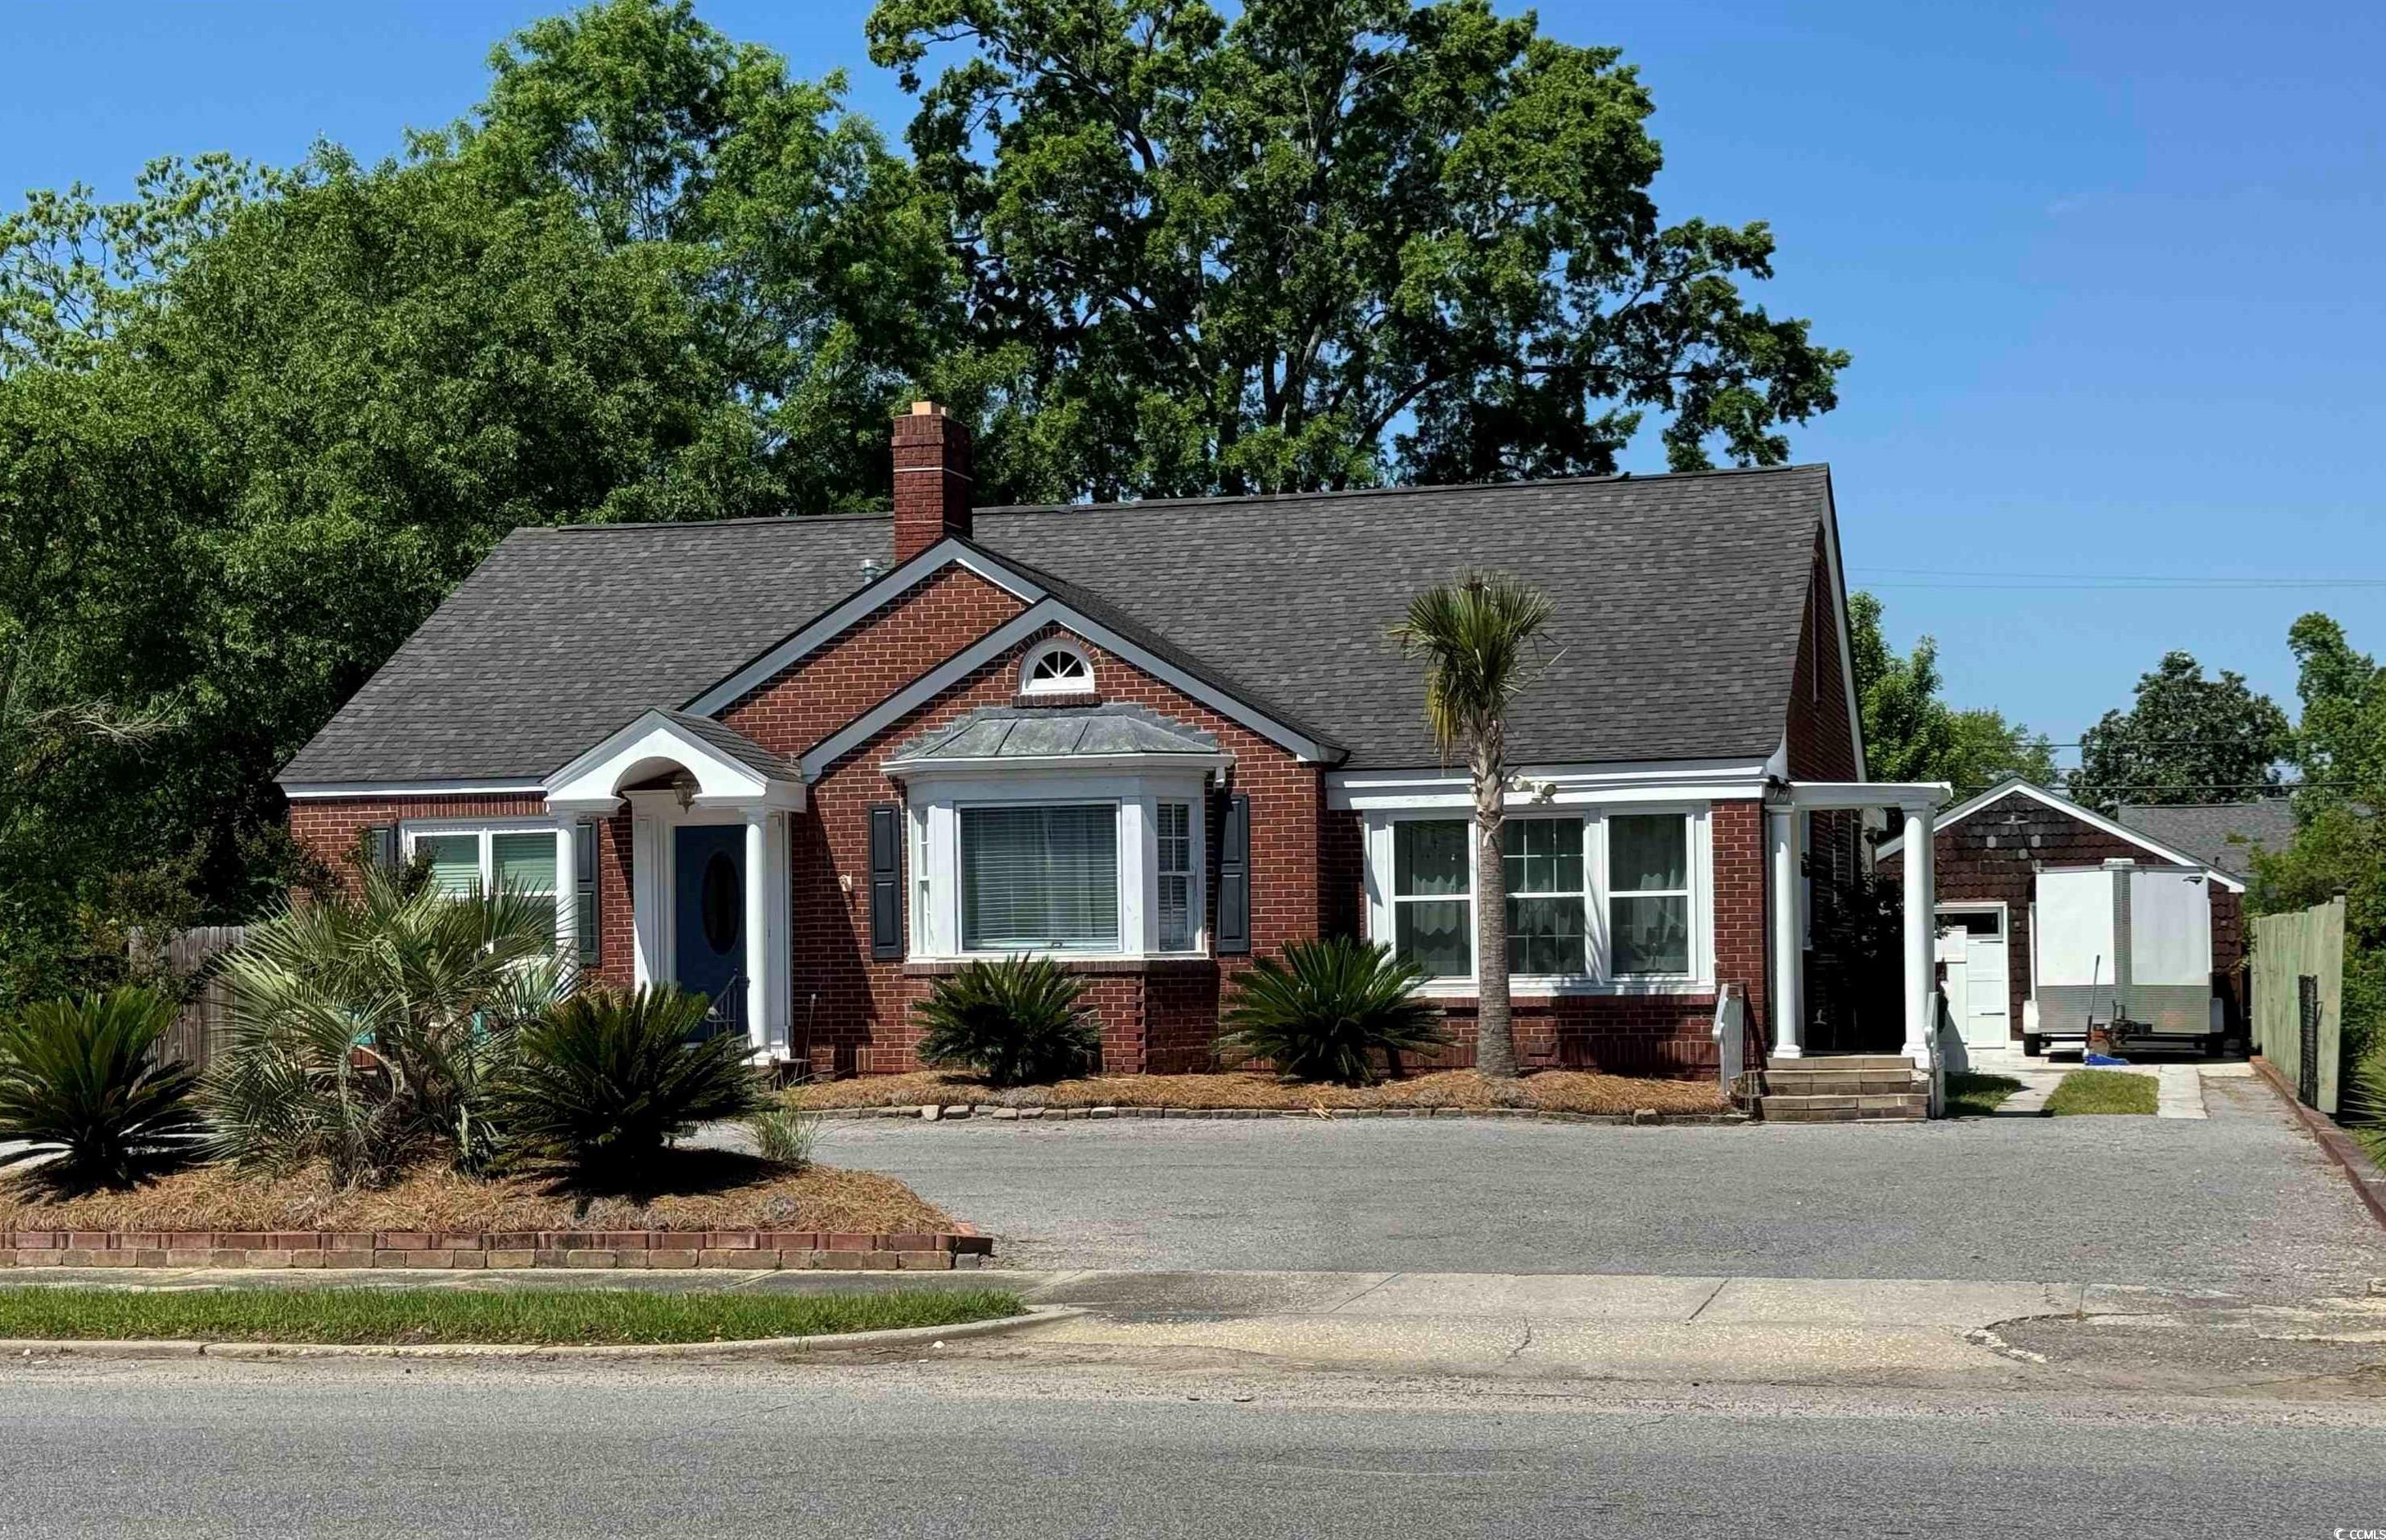 Photo one of 208 S Morgan Ave. Andrews SC 29510 | MLS 2409573